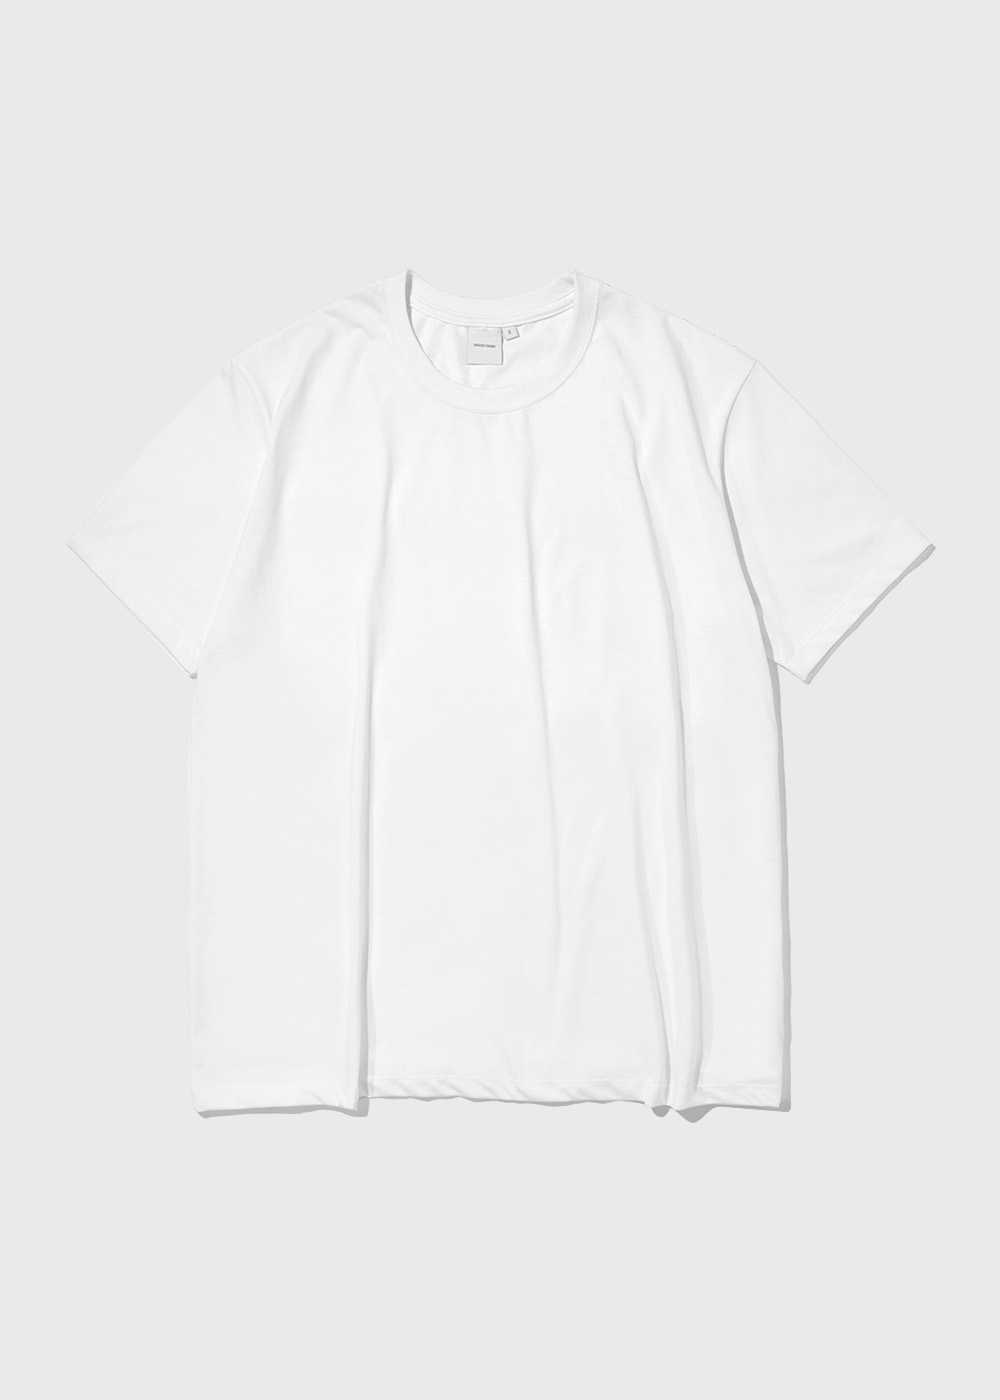 H. Enzymed Carded Cotton-Polyester Blended 20/1 Single T-shirt _ white